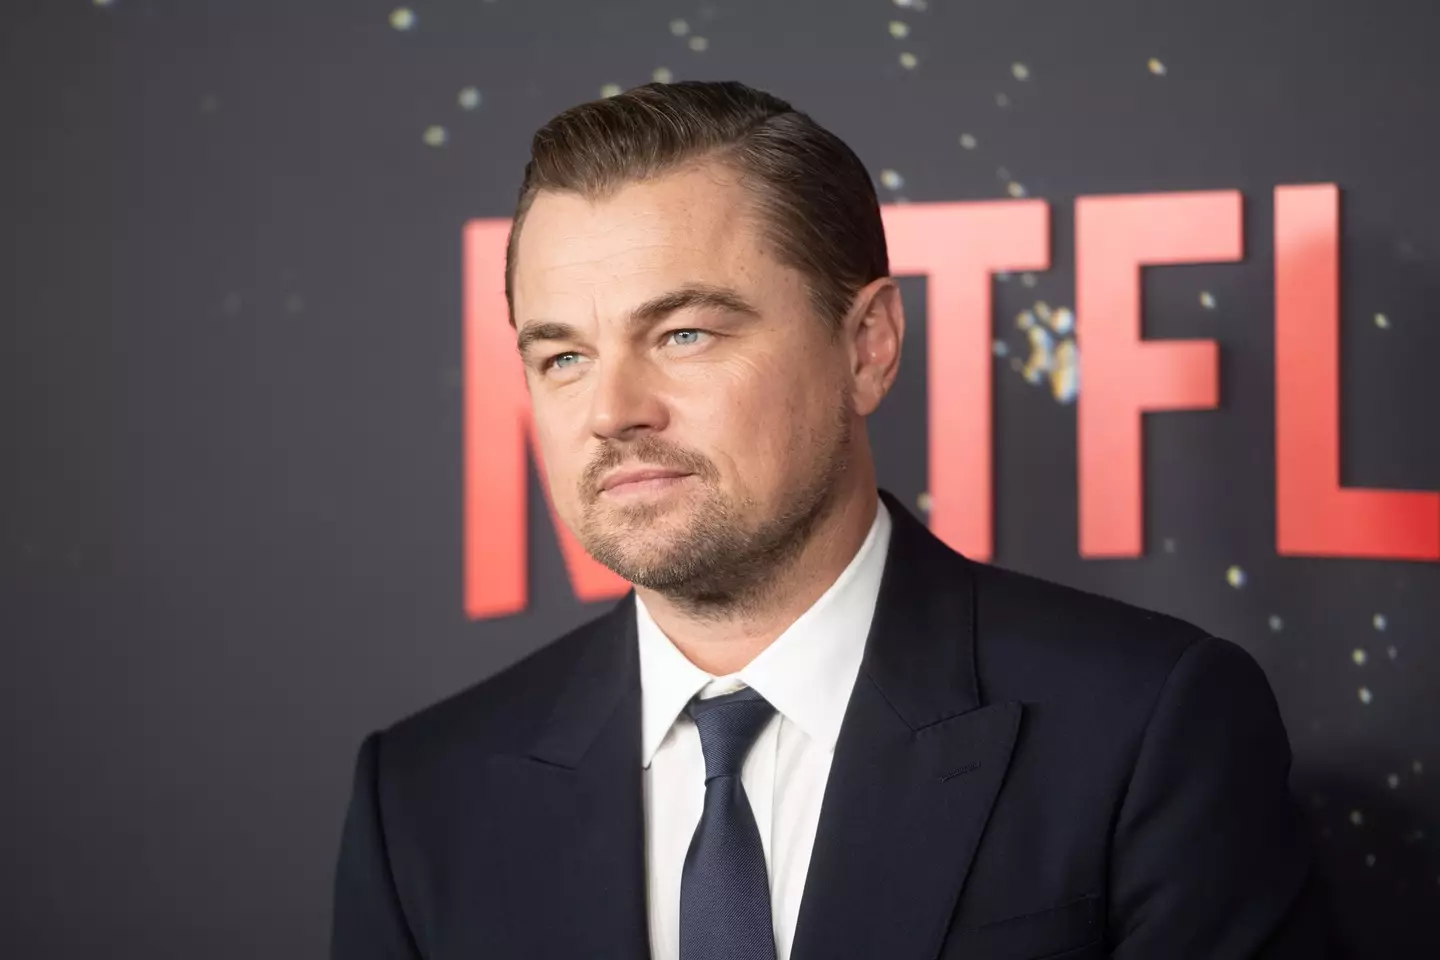 Connelly went on to ask what DiCaprio hopes to do before he hits the 50-year-old milestone.